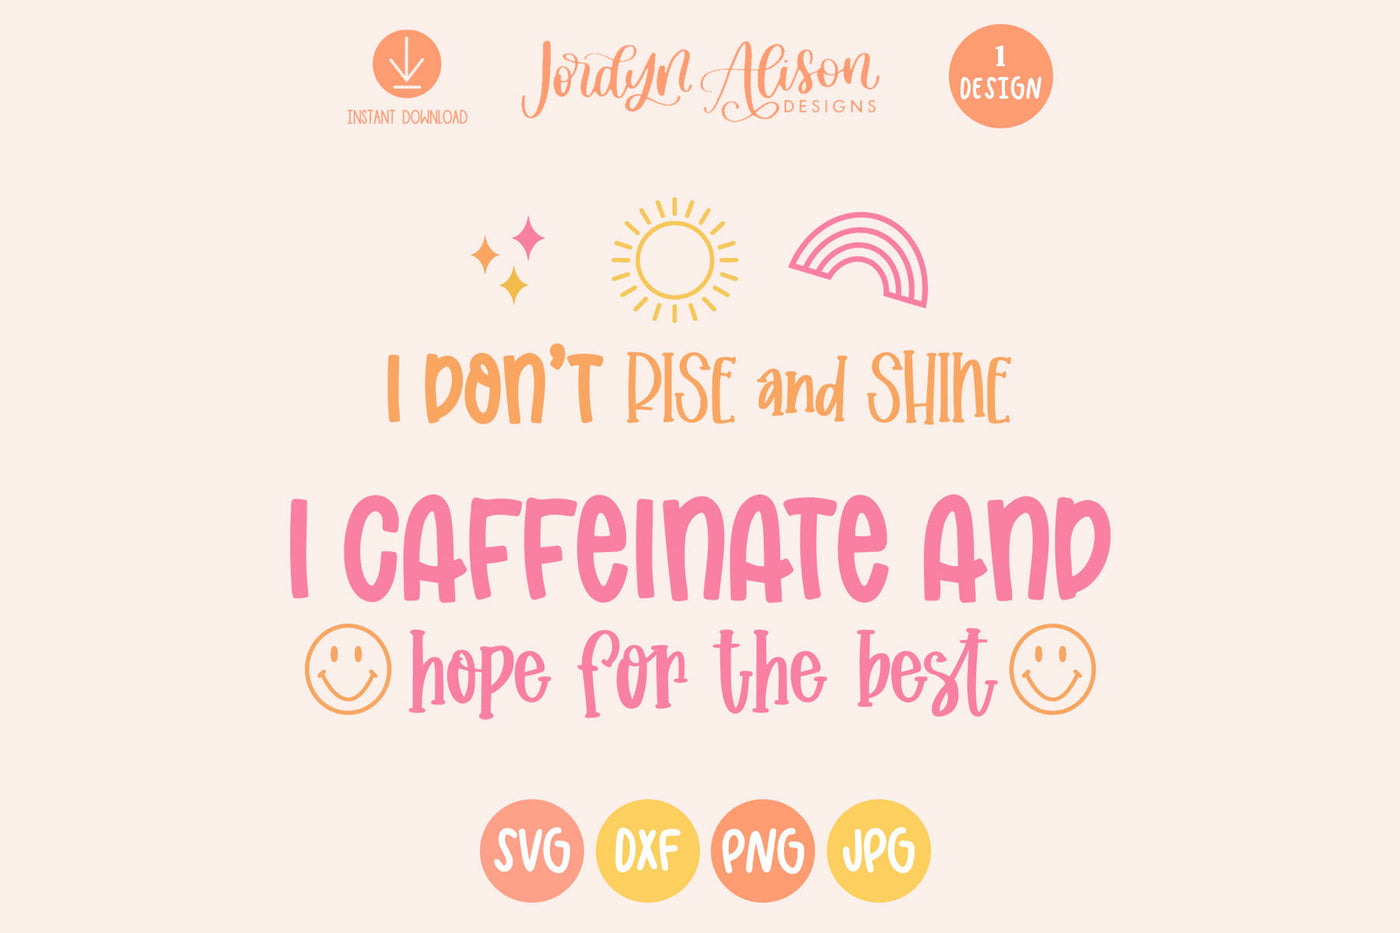 Caffeinate and Hope for the Best SVG